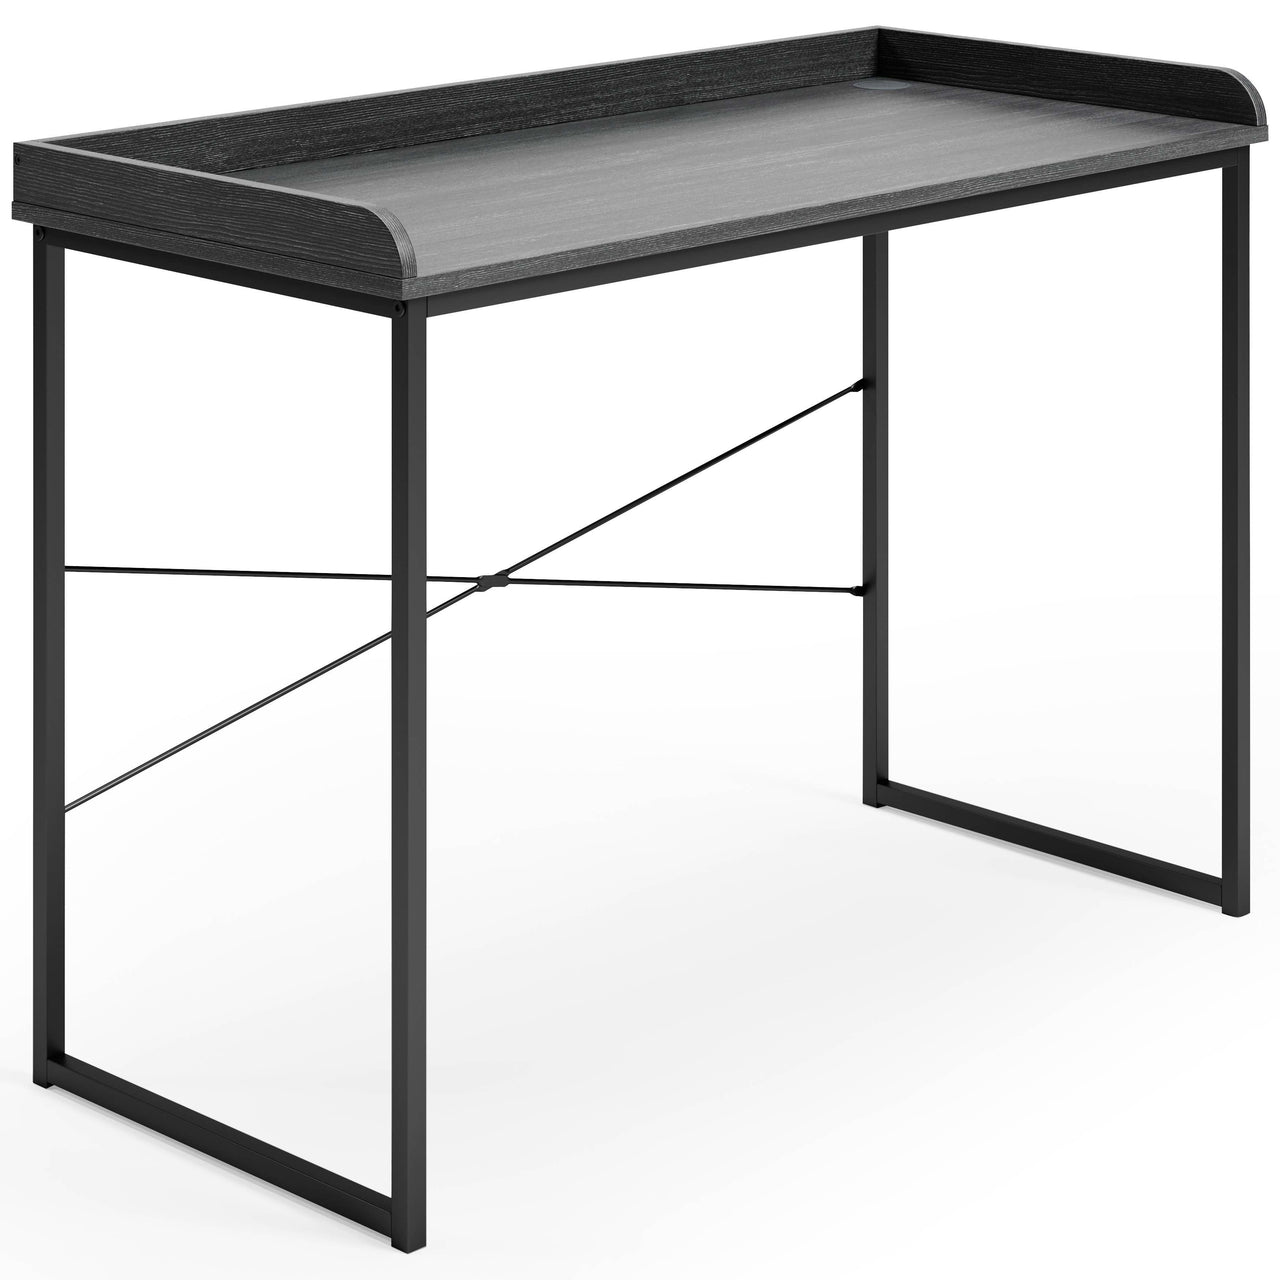 Yarlow - Black - Home Office Desk - Crossback Tony's Home Furnishings Furniture. Beds. Dressers. Sofas.